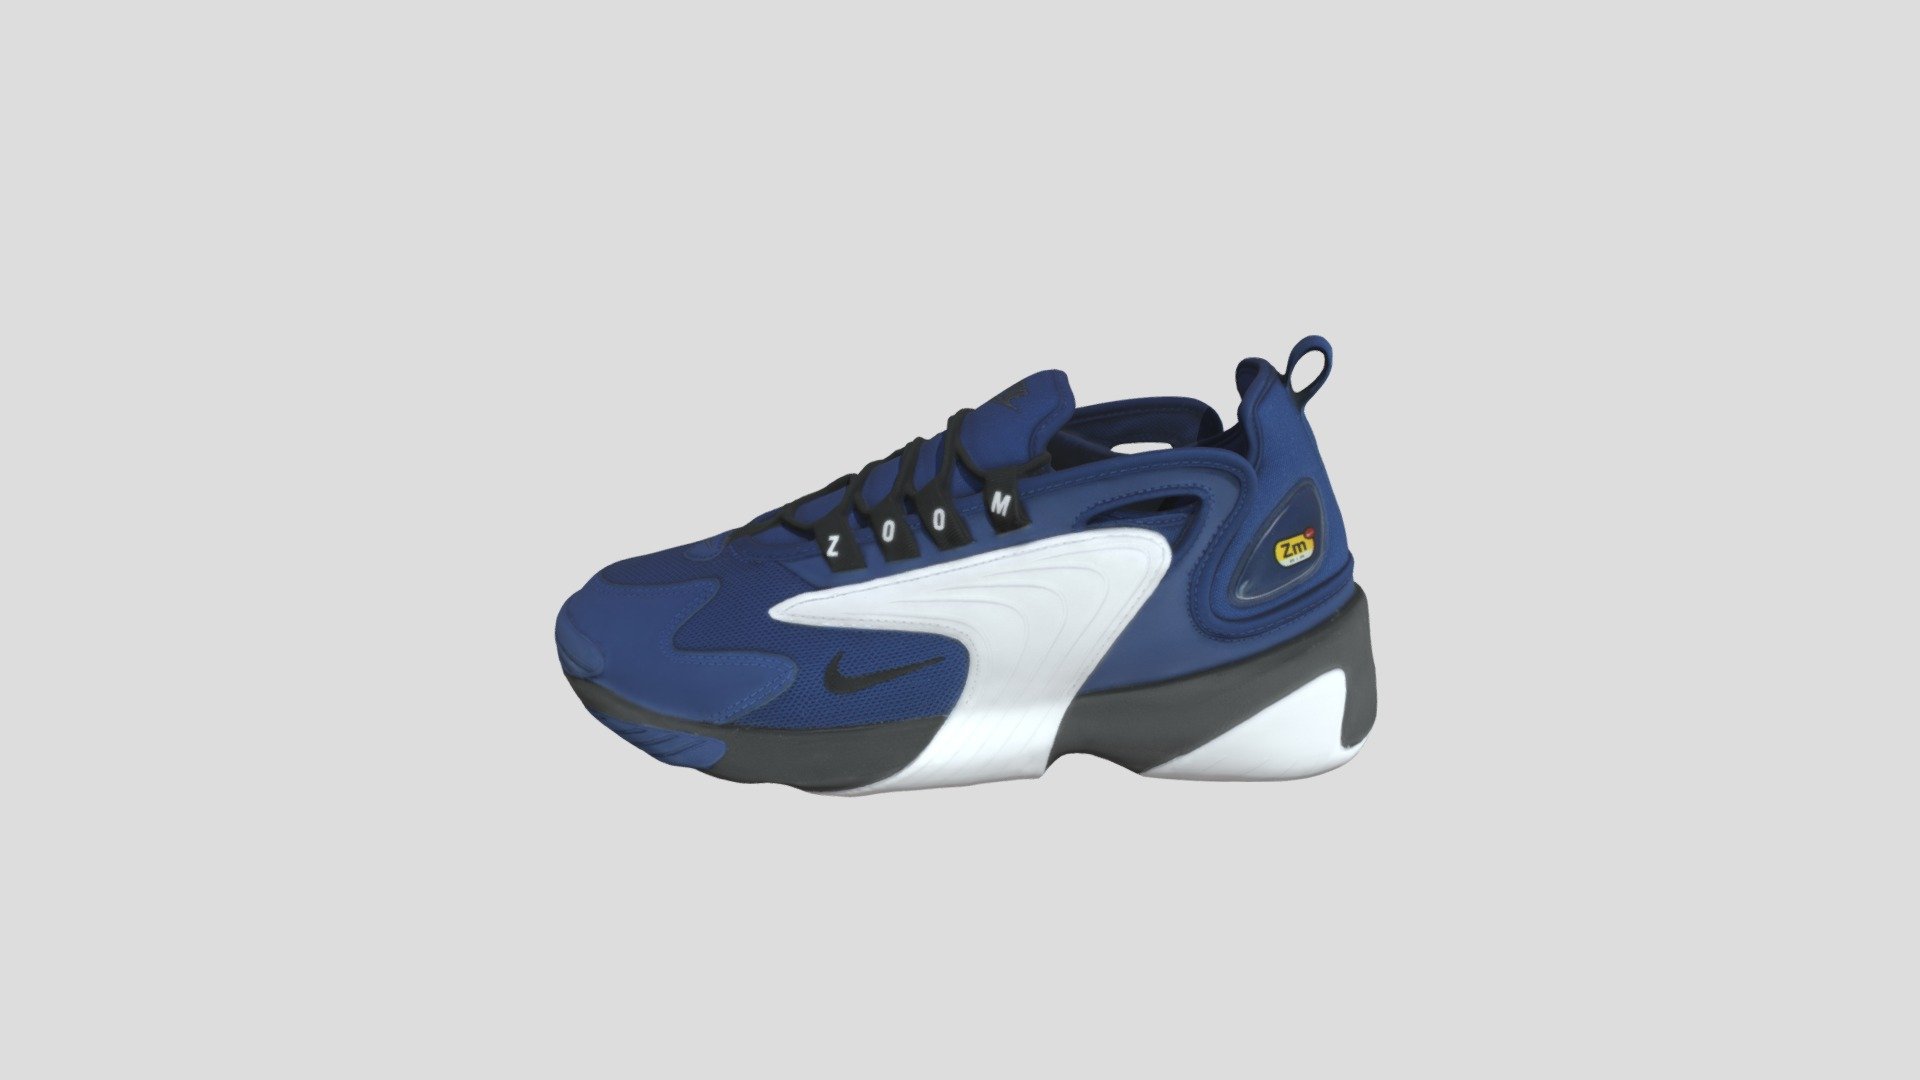 This model was created firstly by 3D scanning on retail version, and then being detail-improved manually, thus a 1:1 repulica of the original
PBR ready
Low-poly
4K texture
Welcome to check out other models we have to offer. And we do accept custom orders as well :) - Nike Zoom 2K 藏蓝白_AO0269-402 - Buy Royalty Free 3D model by TRARGUS 3d model